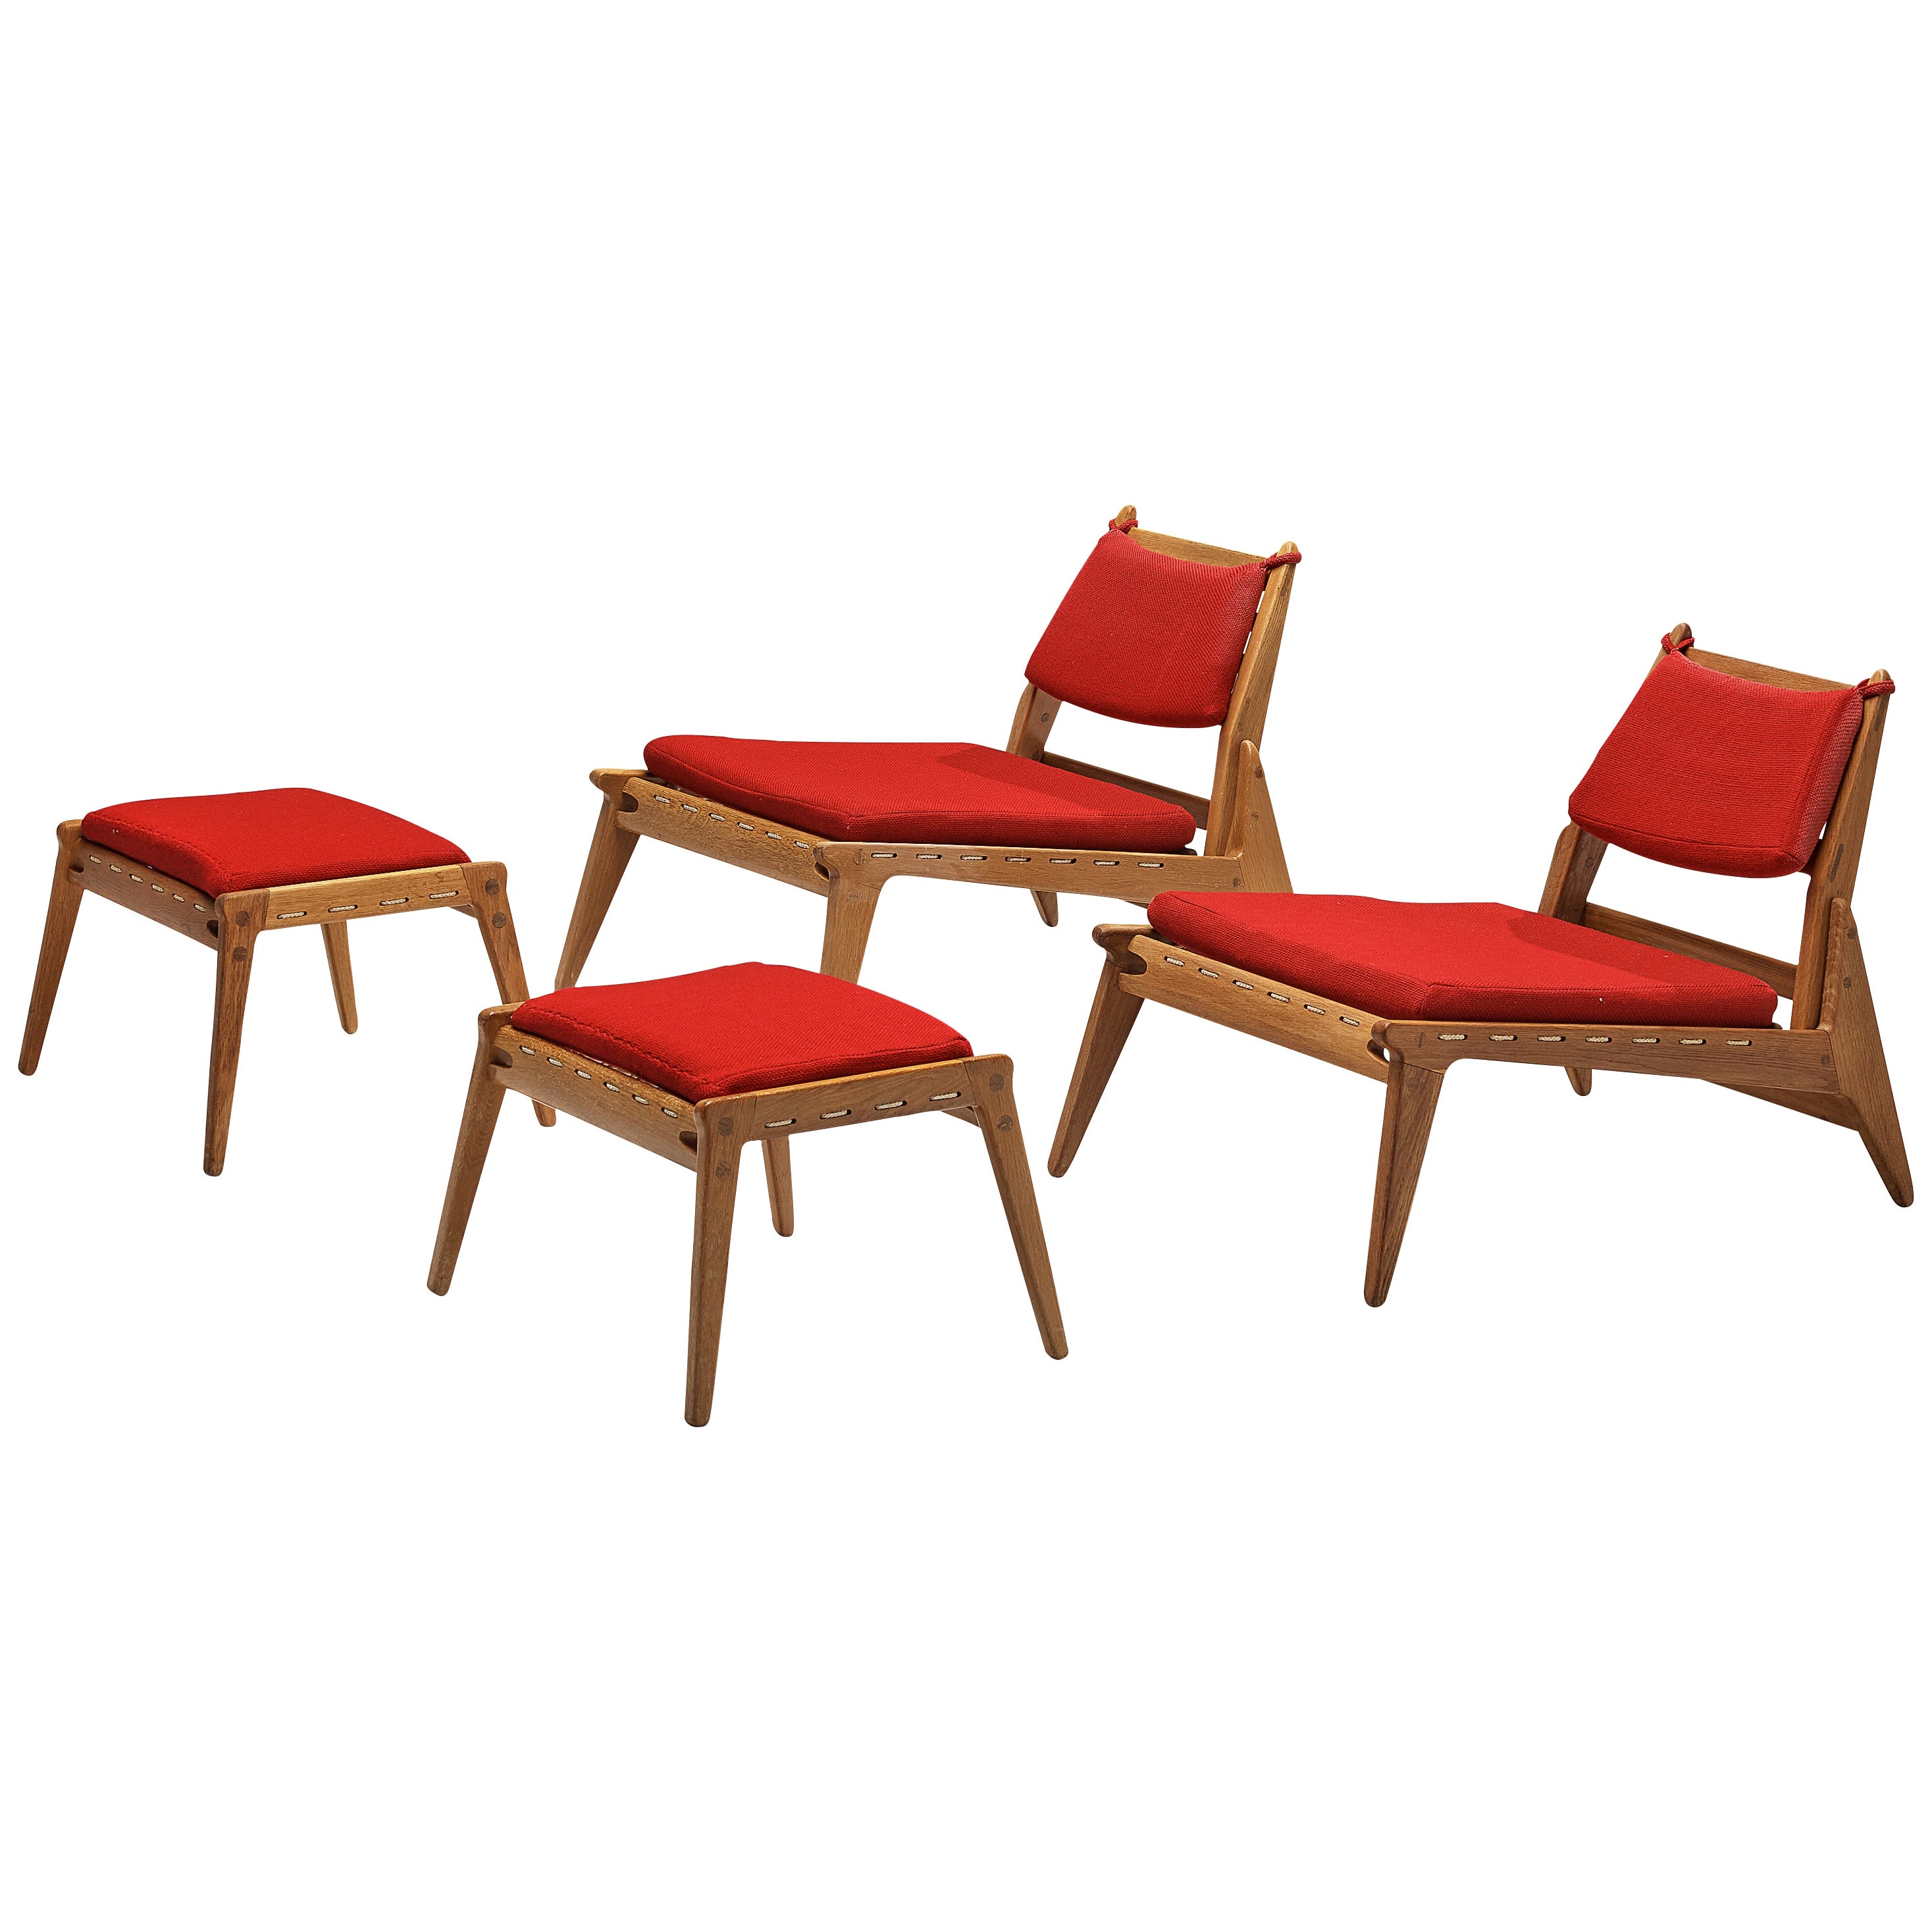 Pair of Low Lounge Chairs with Ottoman in Oak and Red Upholstery